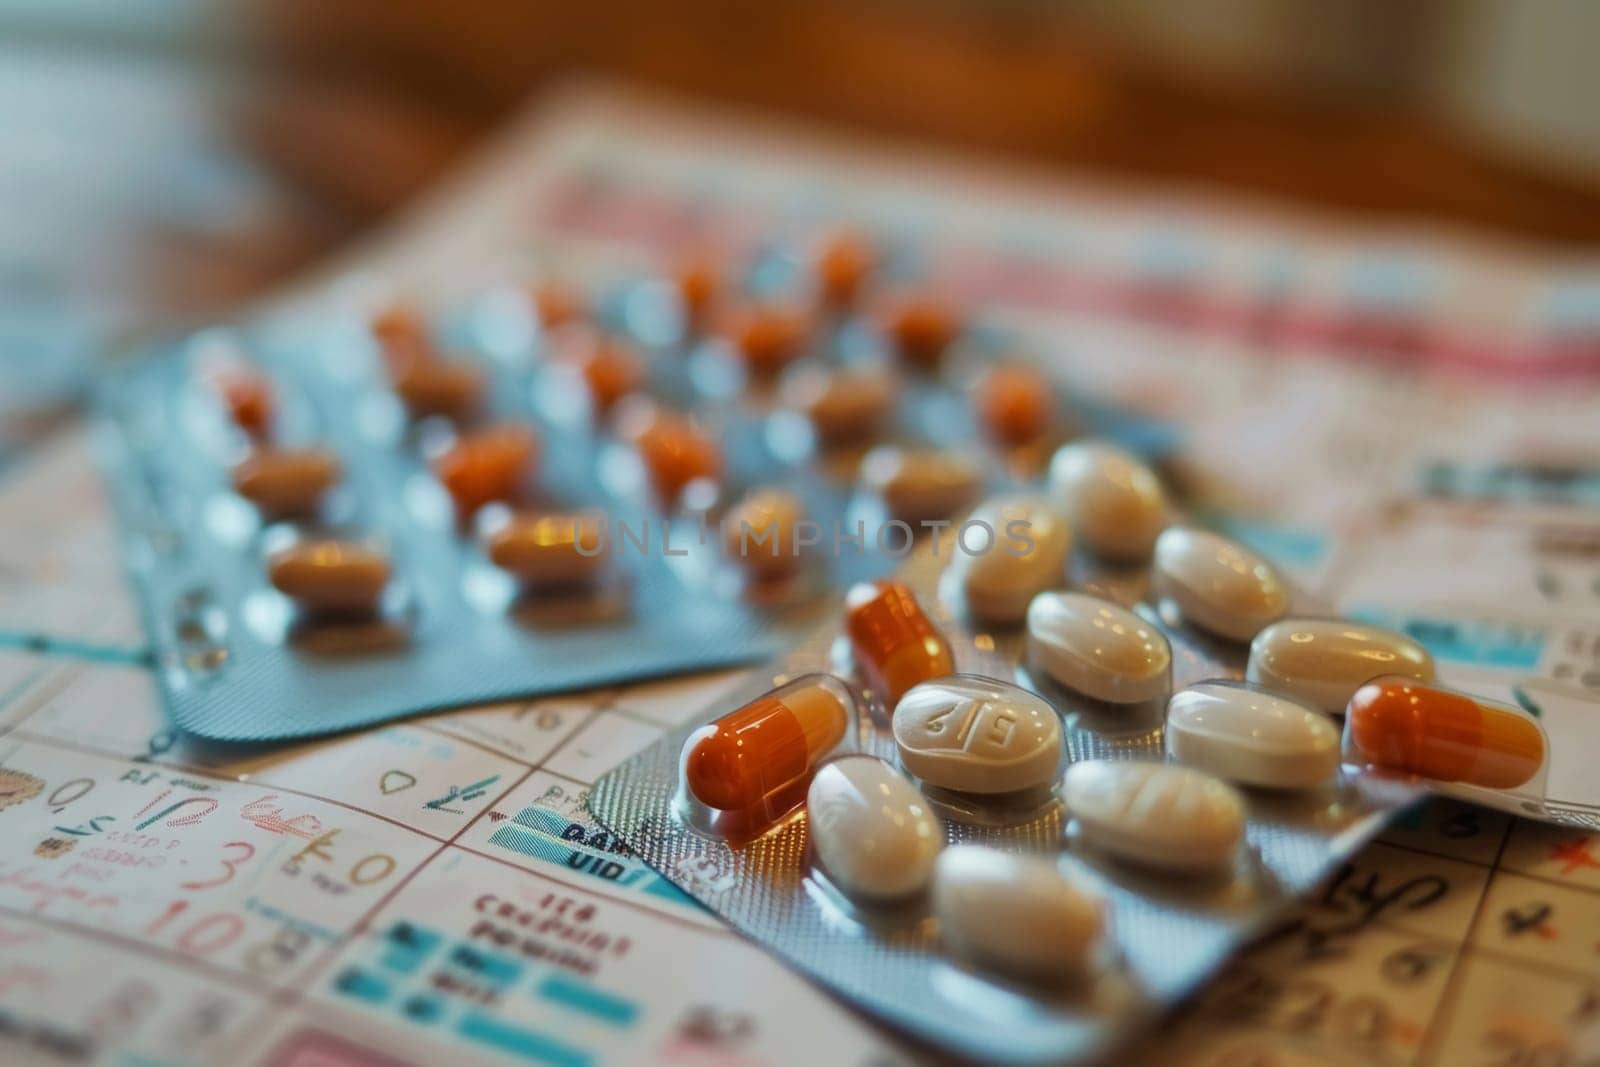 Blister packs of pills organized beside a calendar, depicting the careful management of medication schedules for health treatment